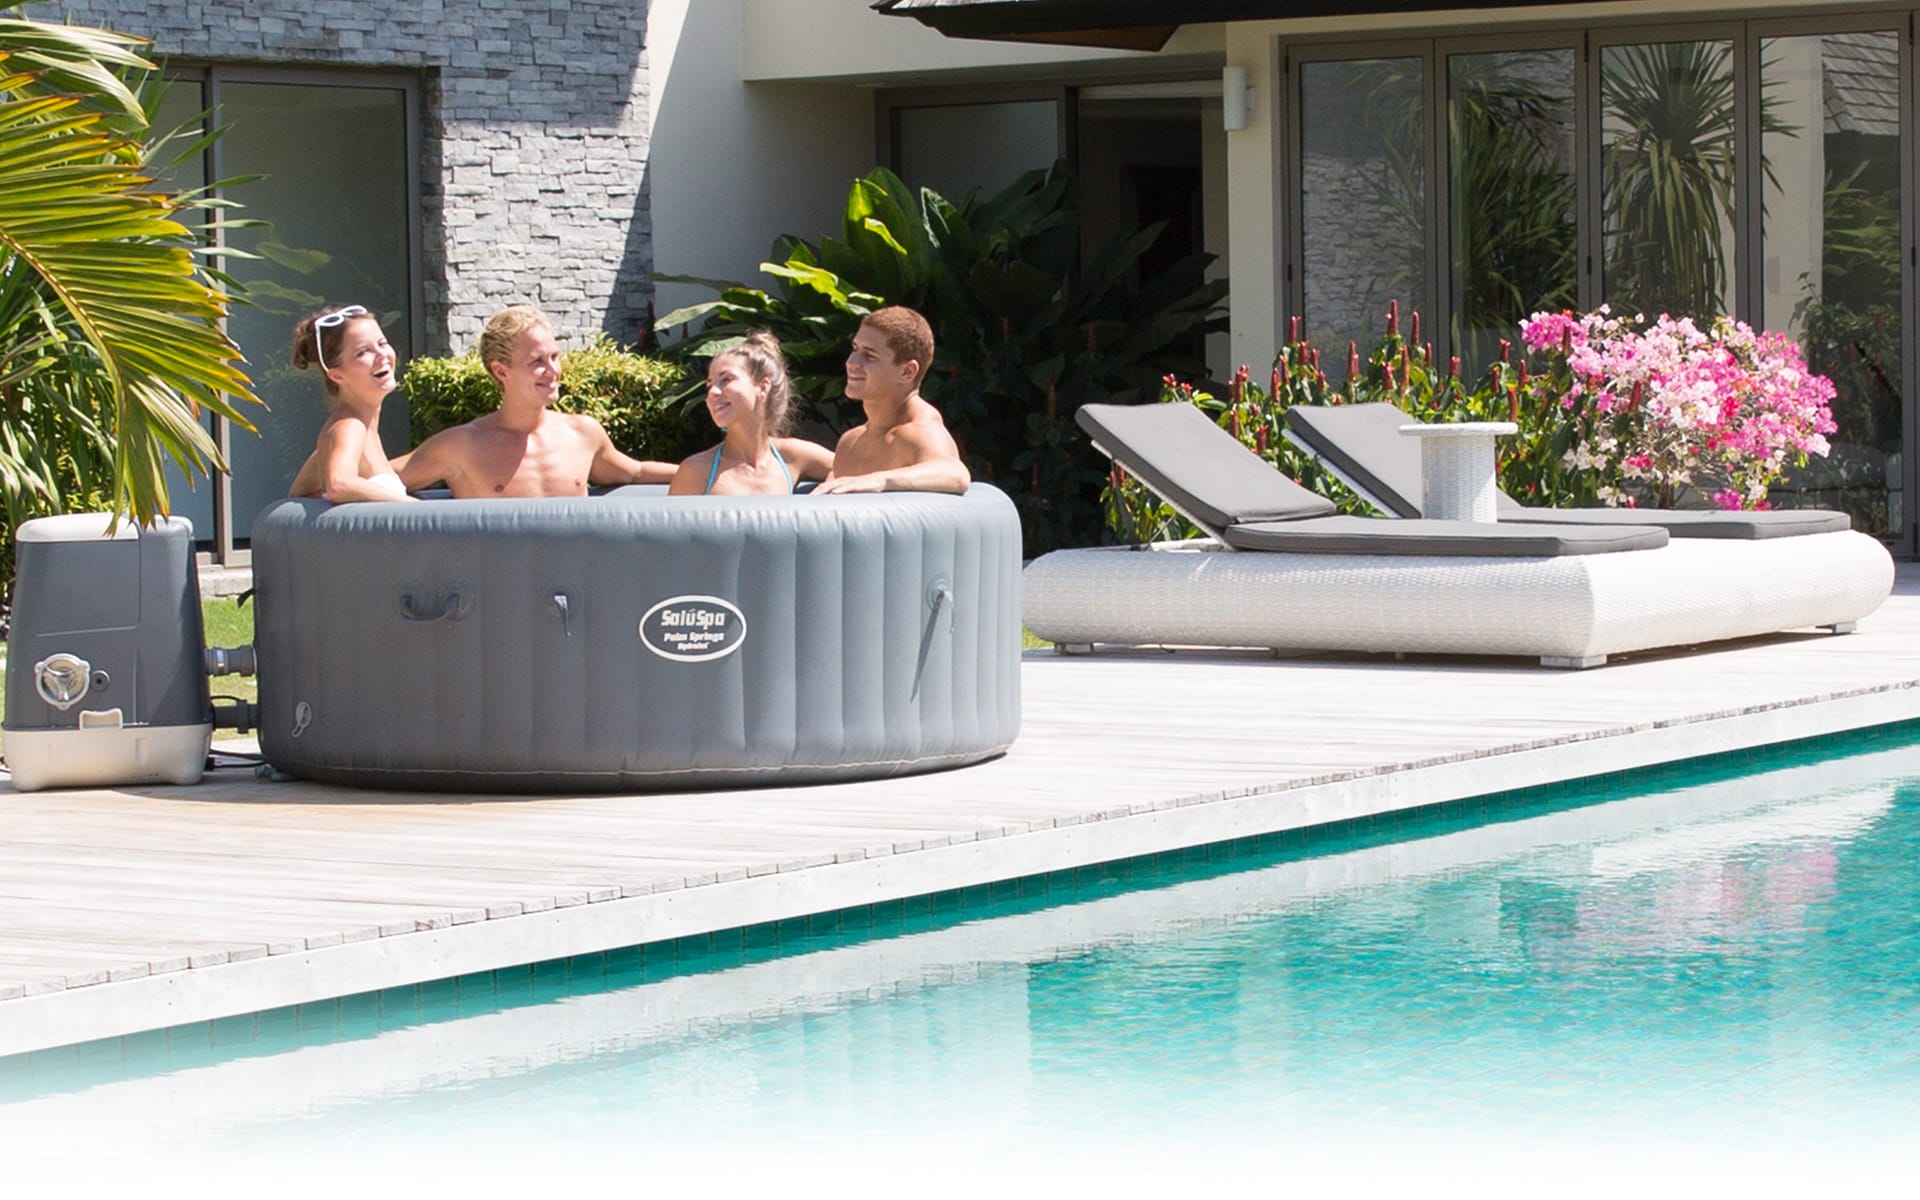 Coleman Lay-z-Spa vs. SaluSpa: Which One is Best?